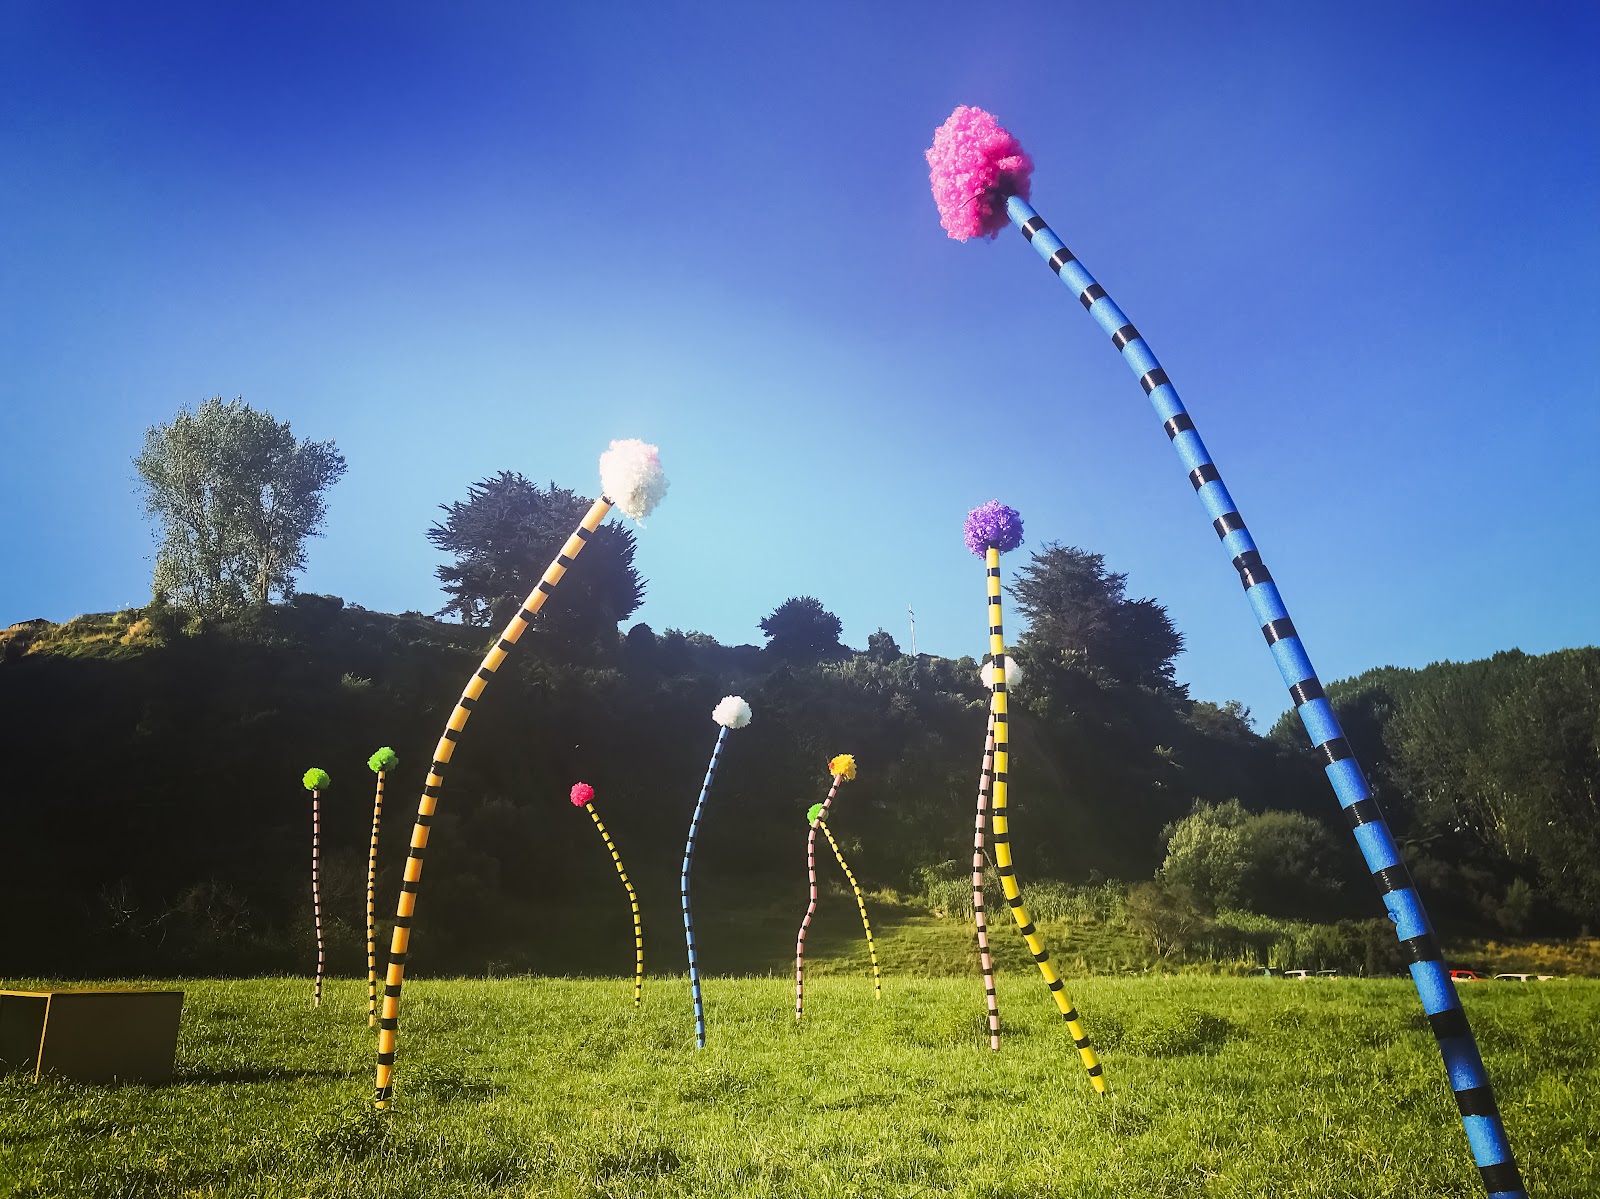 An art piece consisting of long striped bendy poles with pom poms on top.